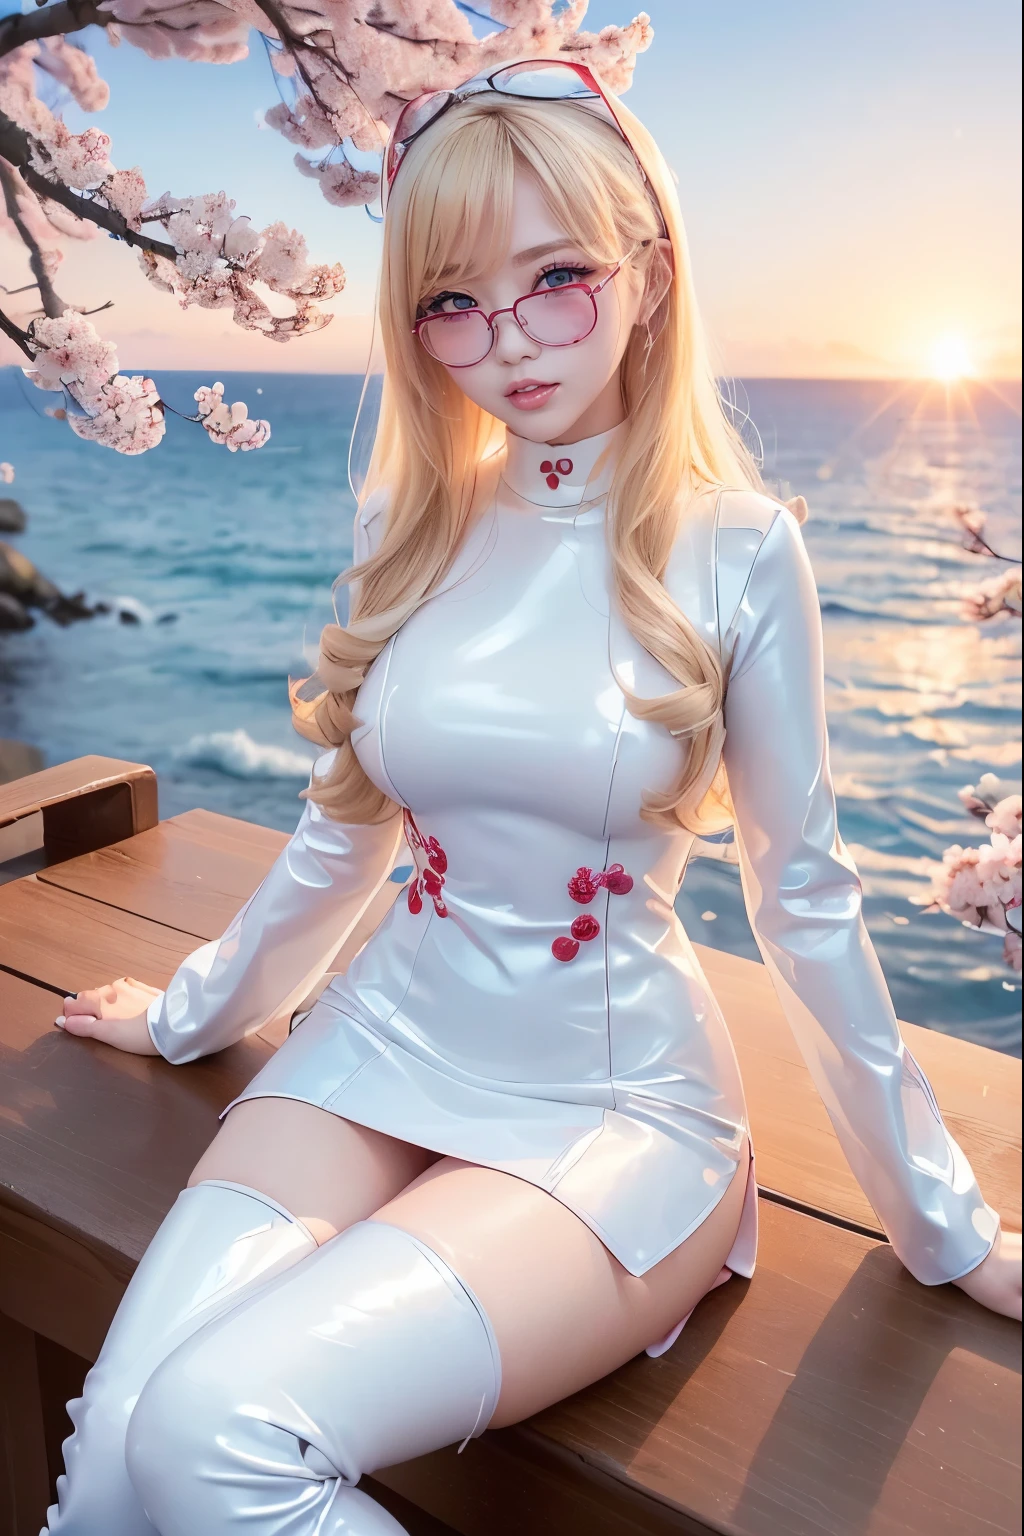 Taiwanese idol girl　Blonde with bangs　((Rimless glasses))　Large Breasts　Big eyes　((White Face Mask))　((Sunset, the sea and lots of cherry blossoms))　((Racing team bodycon dress made from ultra-glossy white and blue patent leather with sponsor lettering.))　((Enamel Knee High Boots))　8K　glamorous　Soft lighting　Sweat　((A large amount of falling cherry blossom petals))　Wind